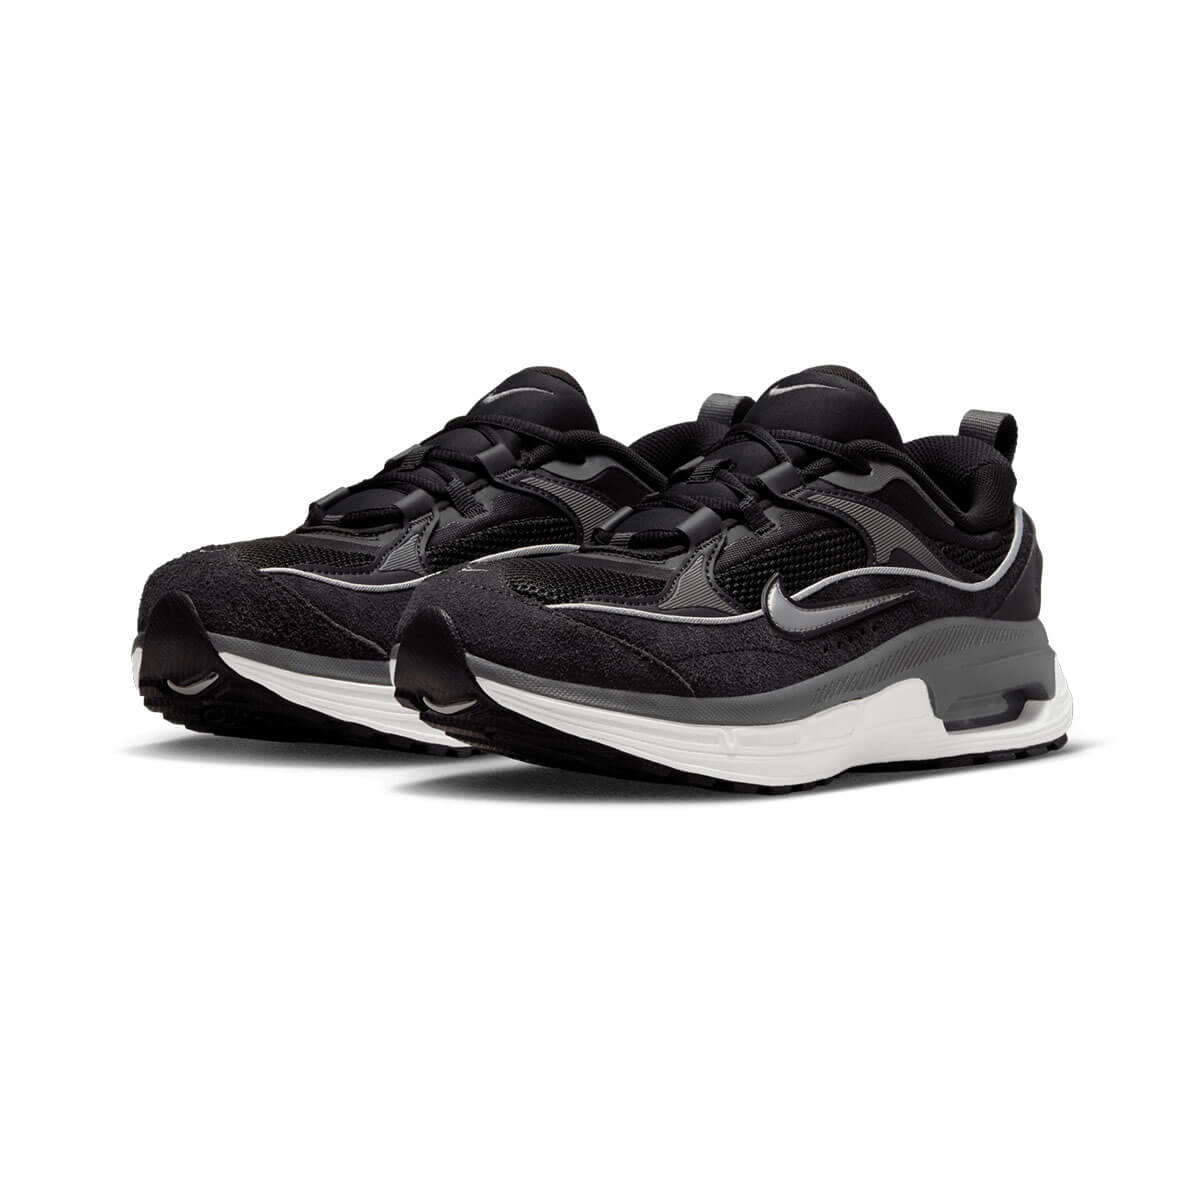 Nike Air Max Bliss Black - Laces Mx | LACES STORE